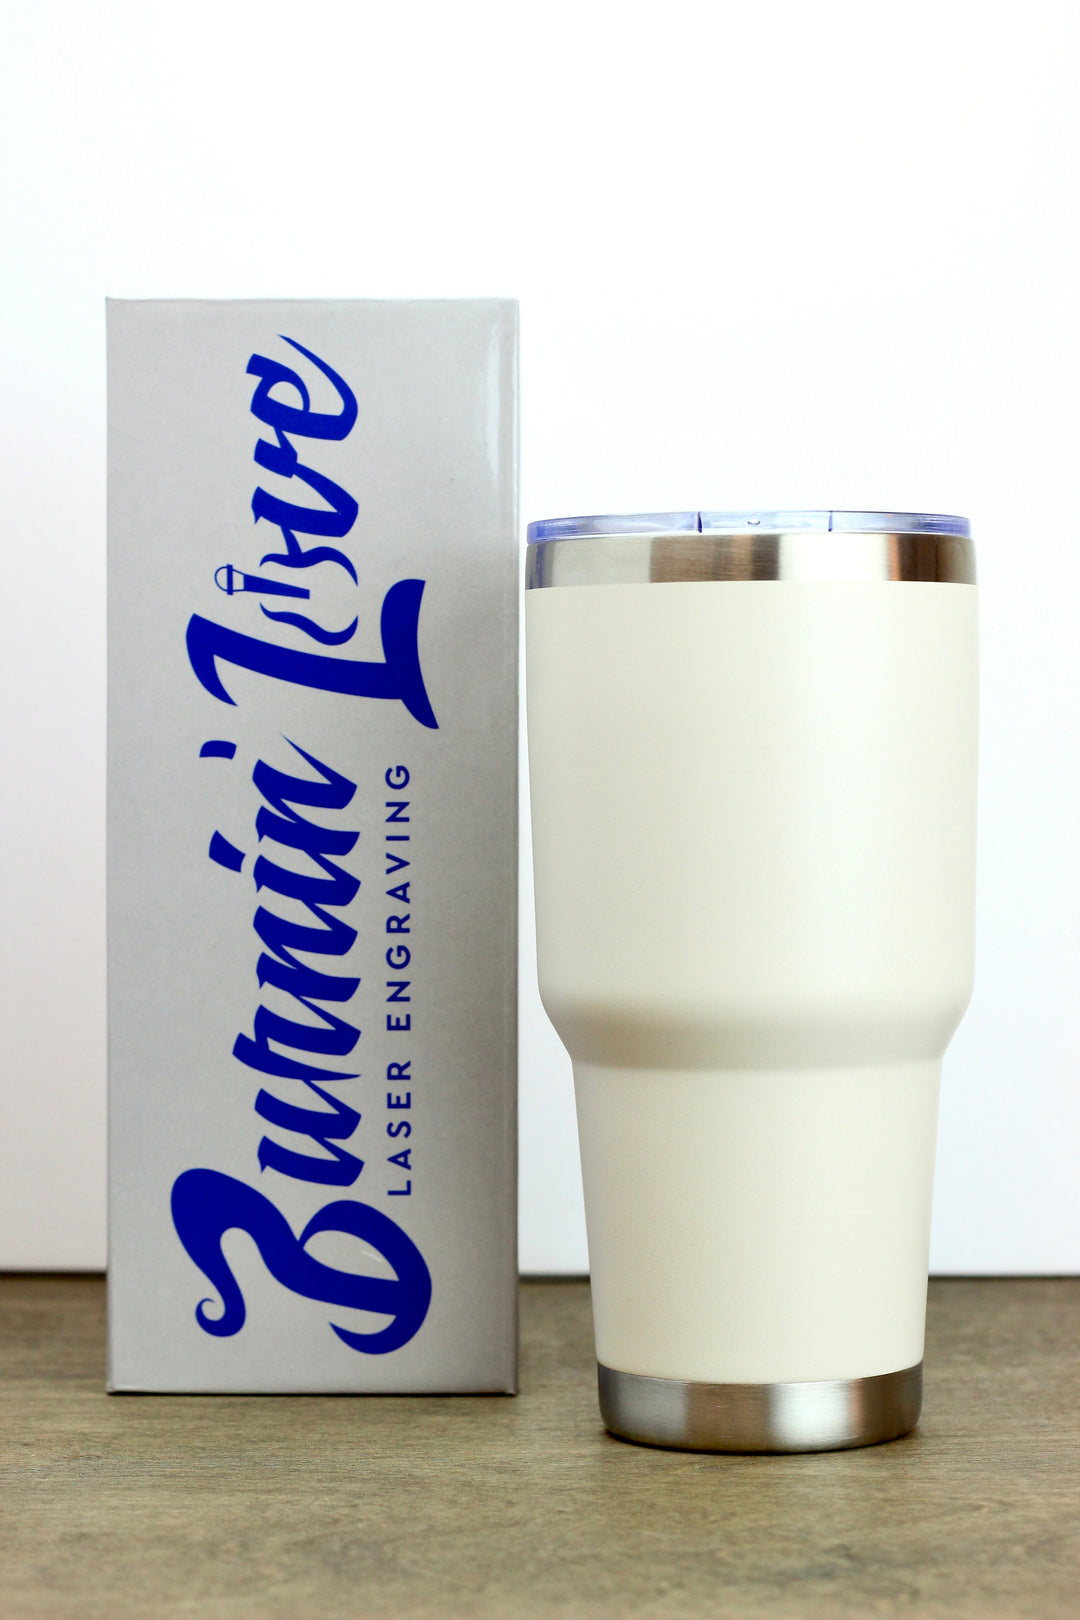 Seabees "Can Do!" 30oz Burnin' Love Laser Engraving Tumblers